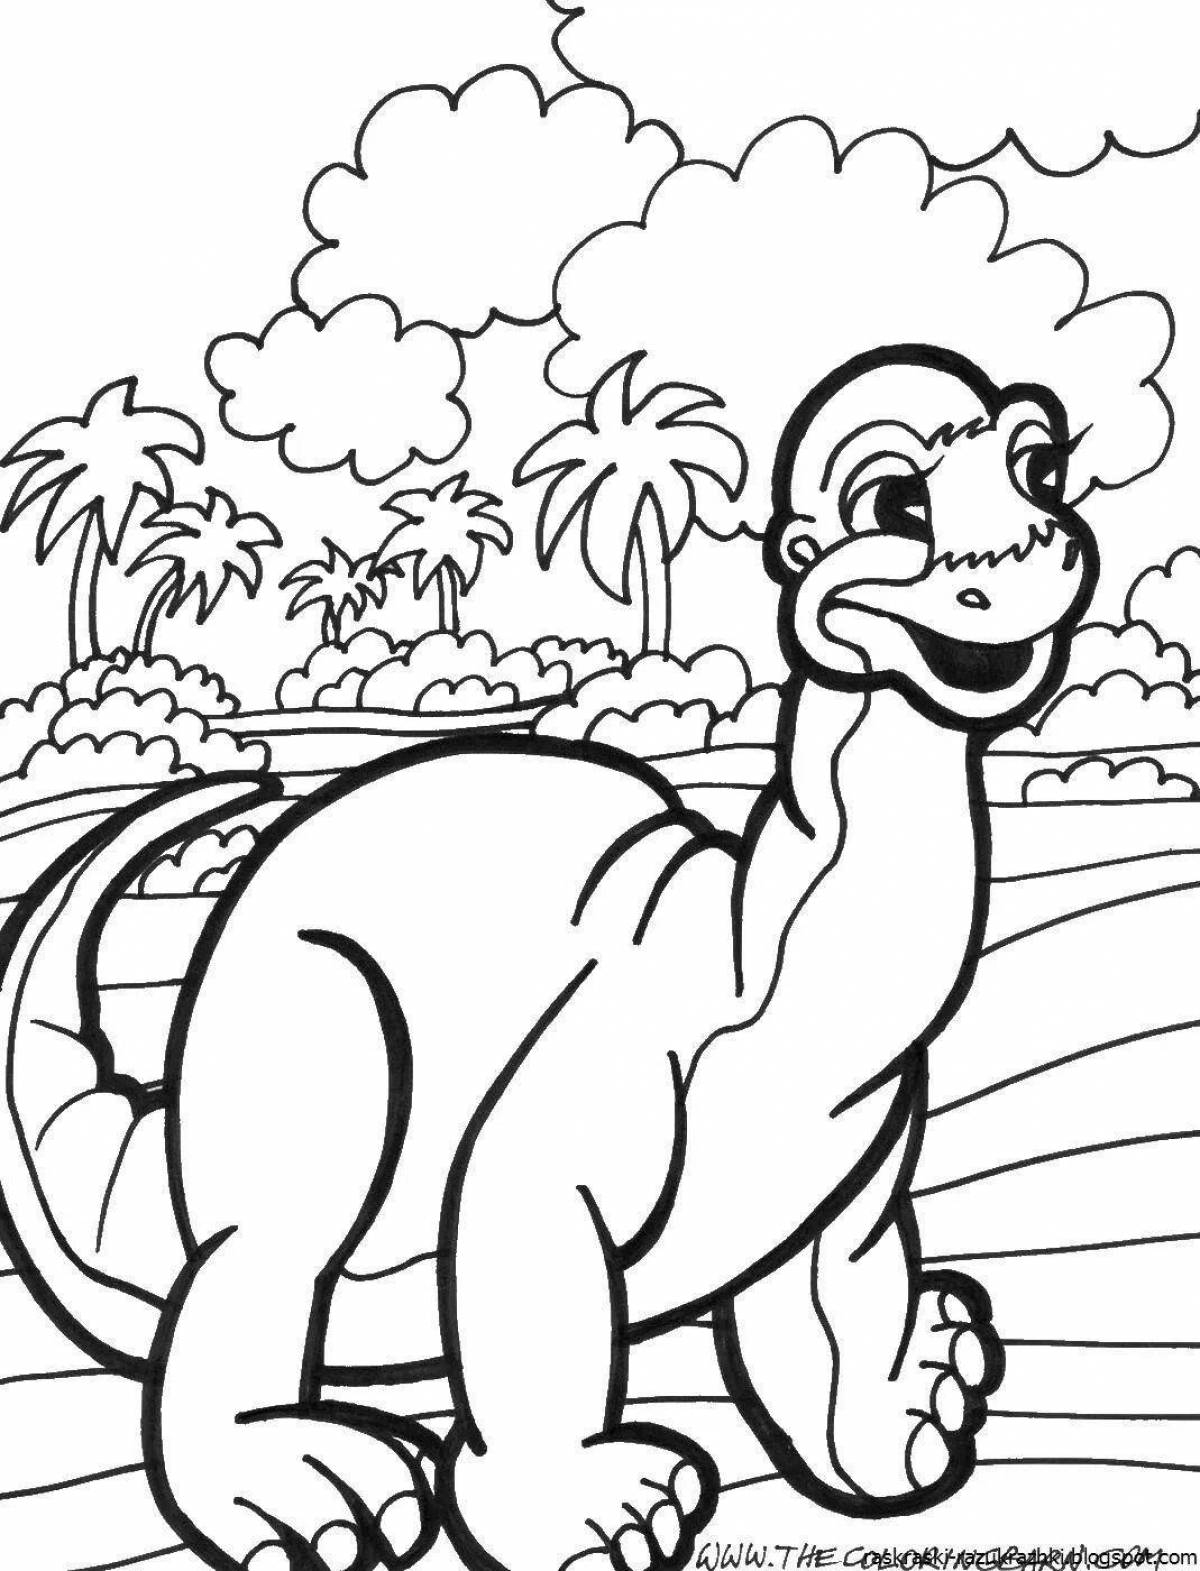 Gorgeous dinosaurs coloring book for 4-5 year olds